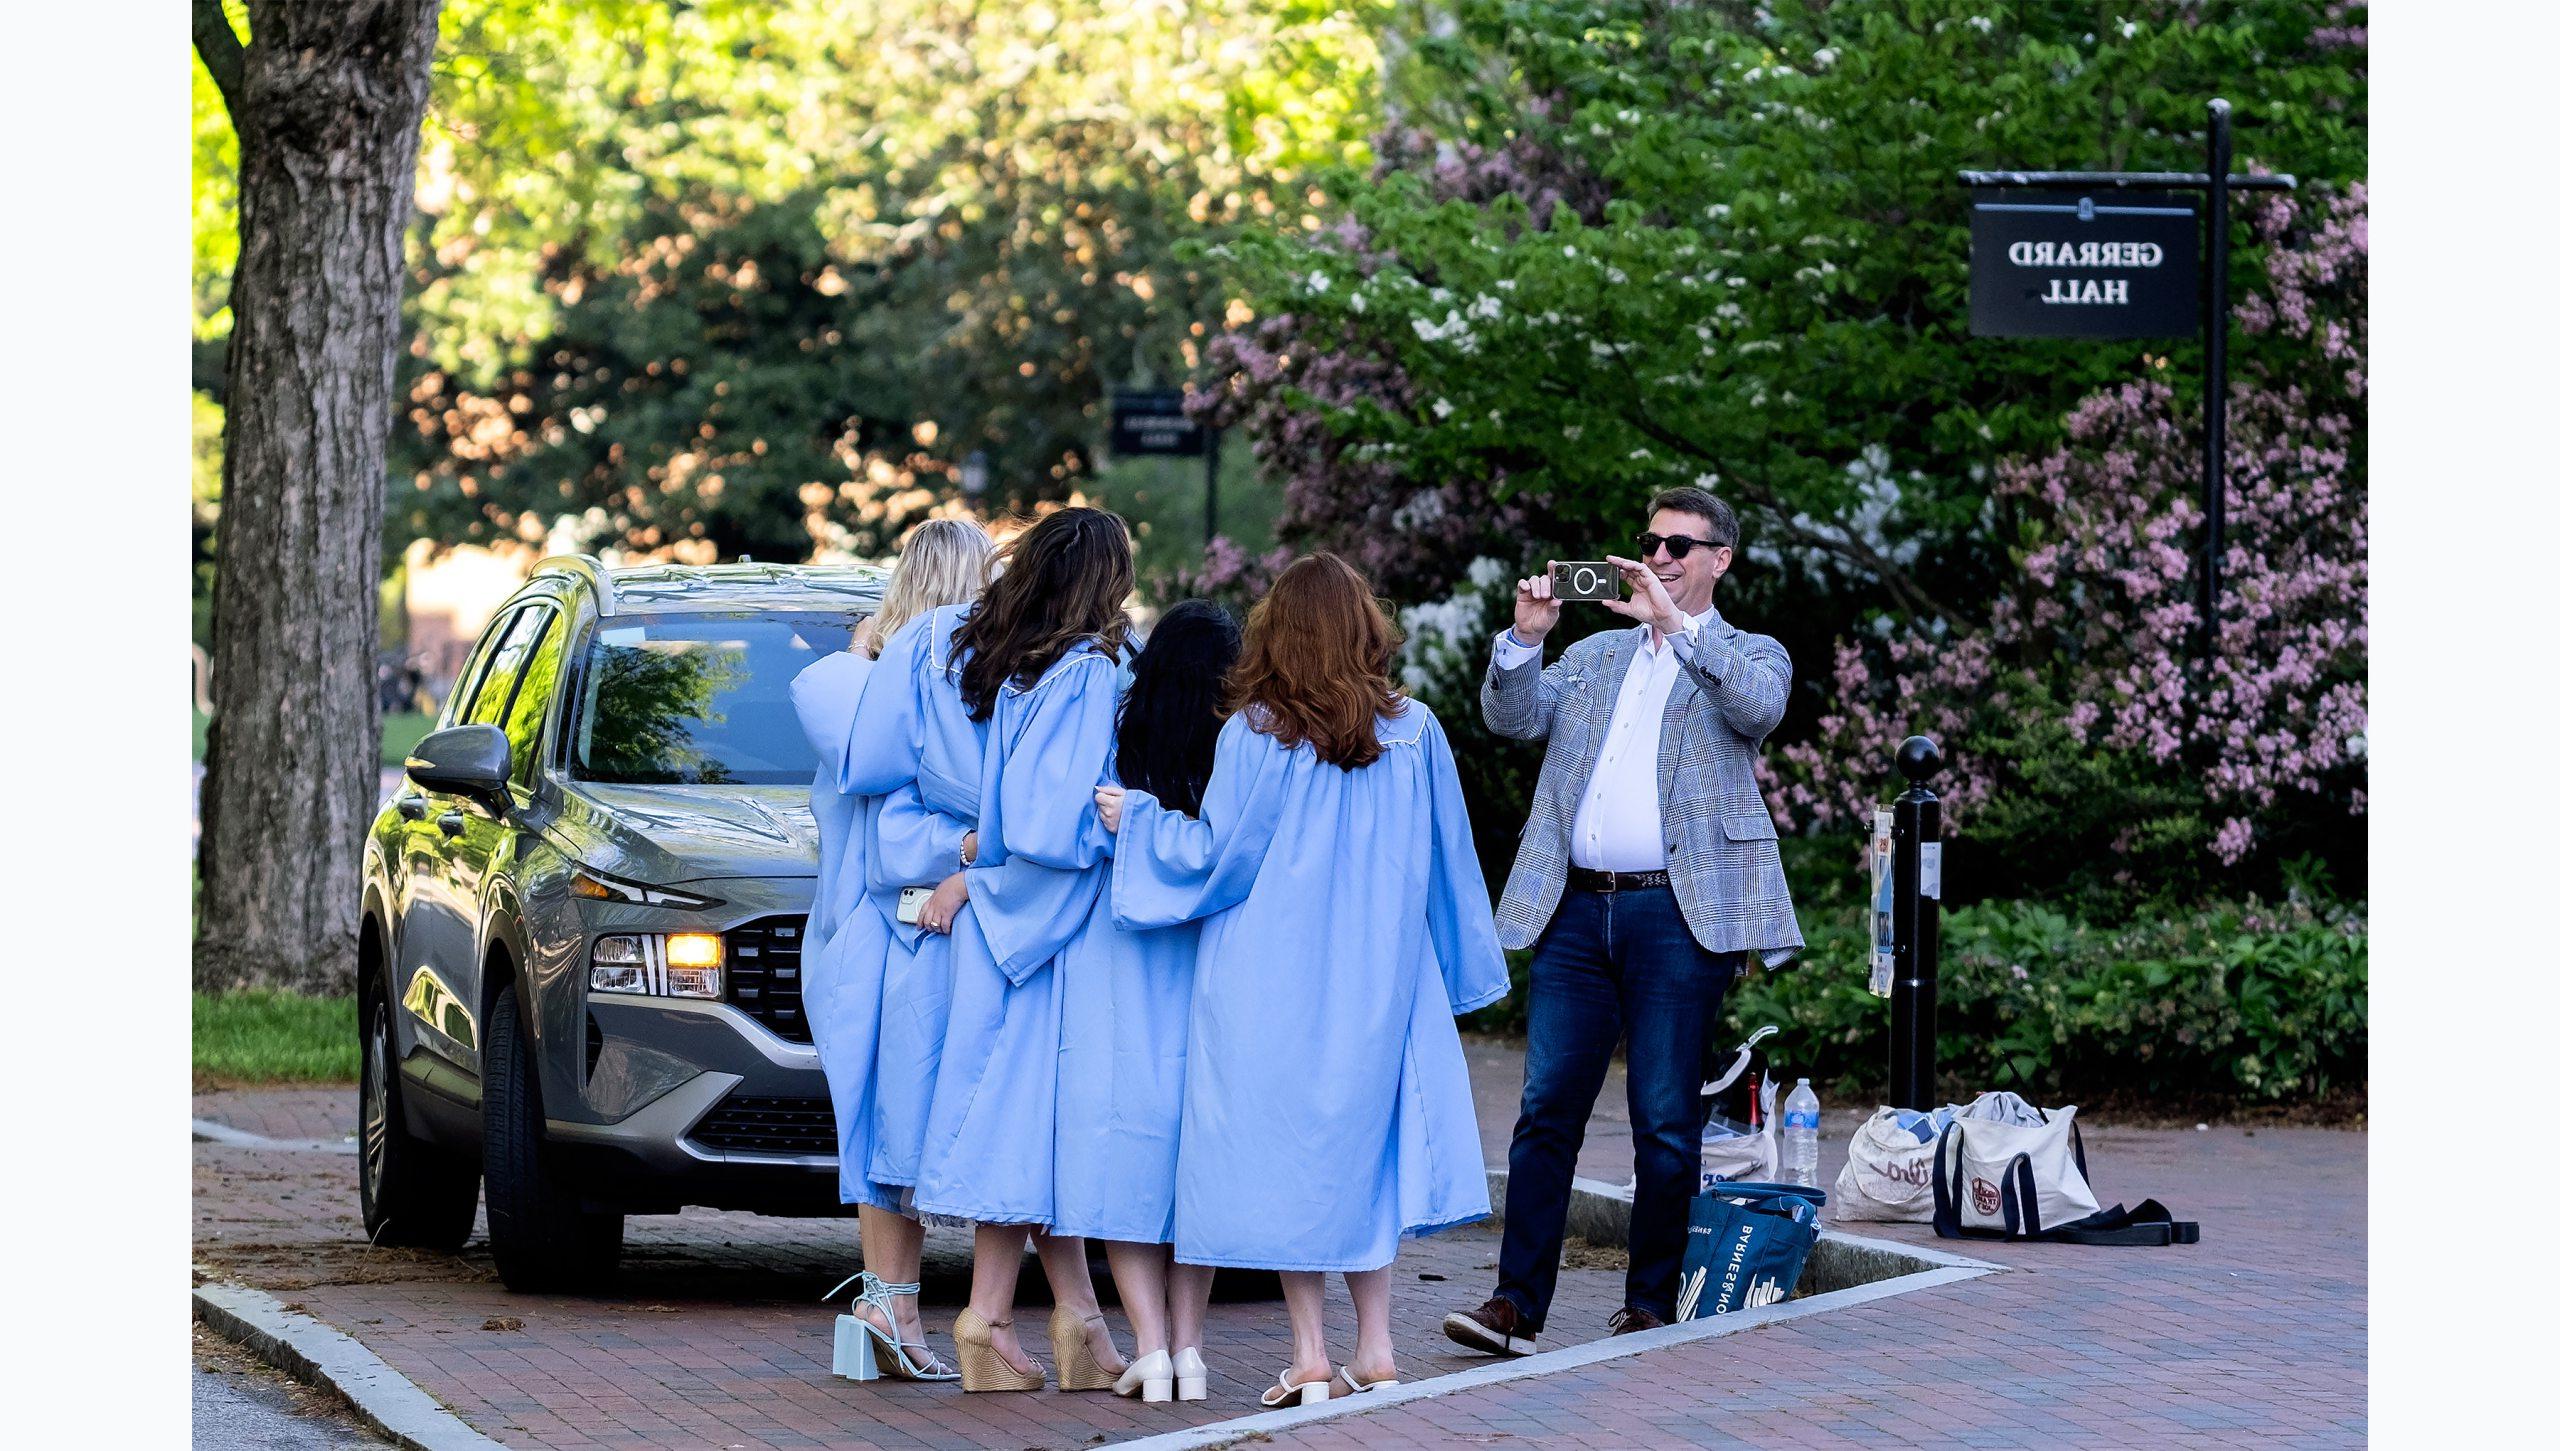 A man taking a picture with a phone of a group of students in graduation gowns.